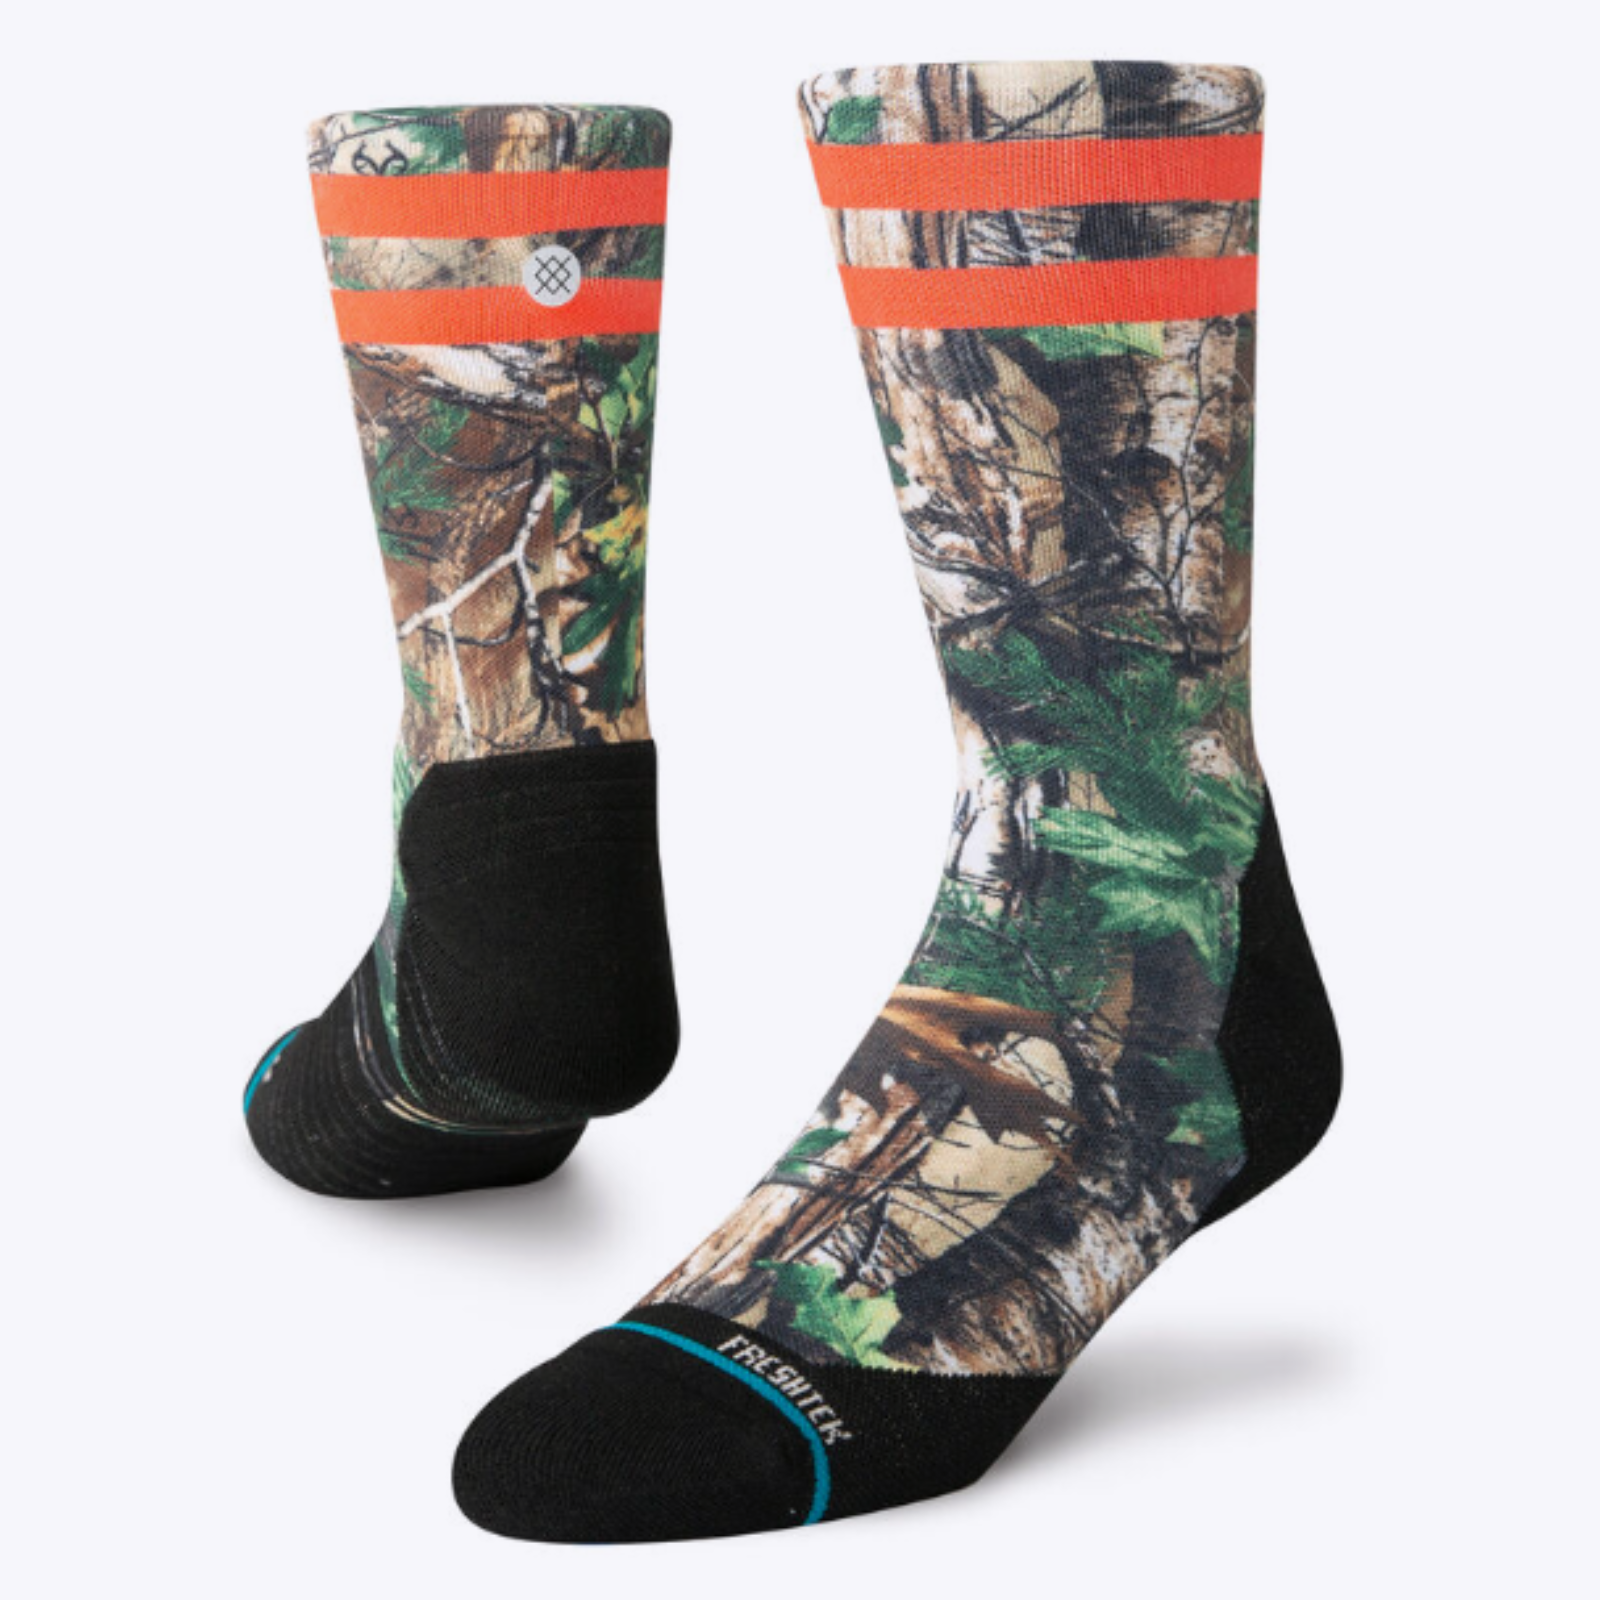 Stance Xtra Light Xtra Performance men's crew sock featuring all-over camouflage pattern and two orange stripes at top. Socks shown on display feet. 